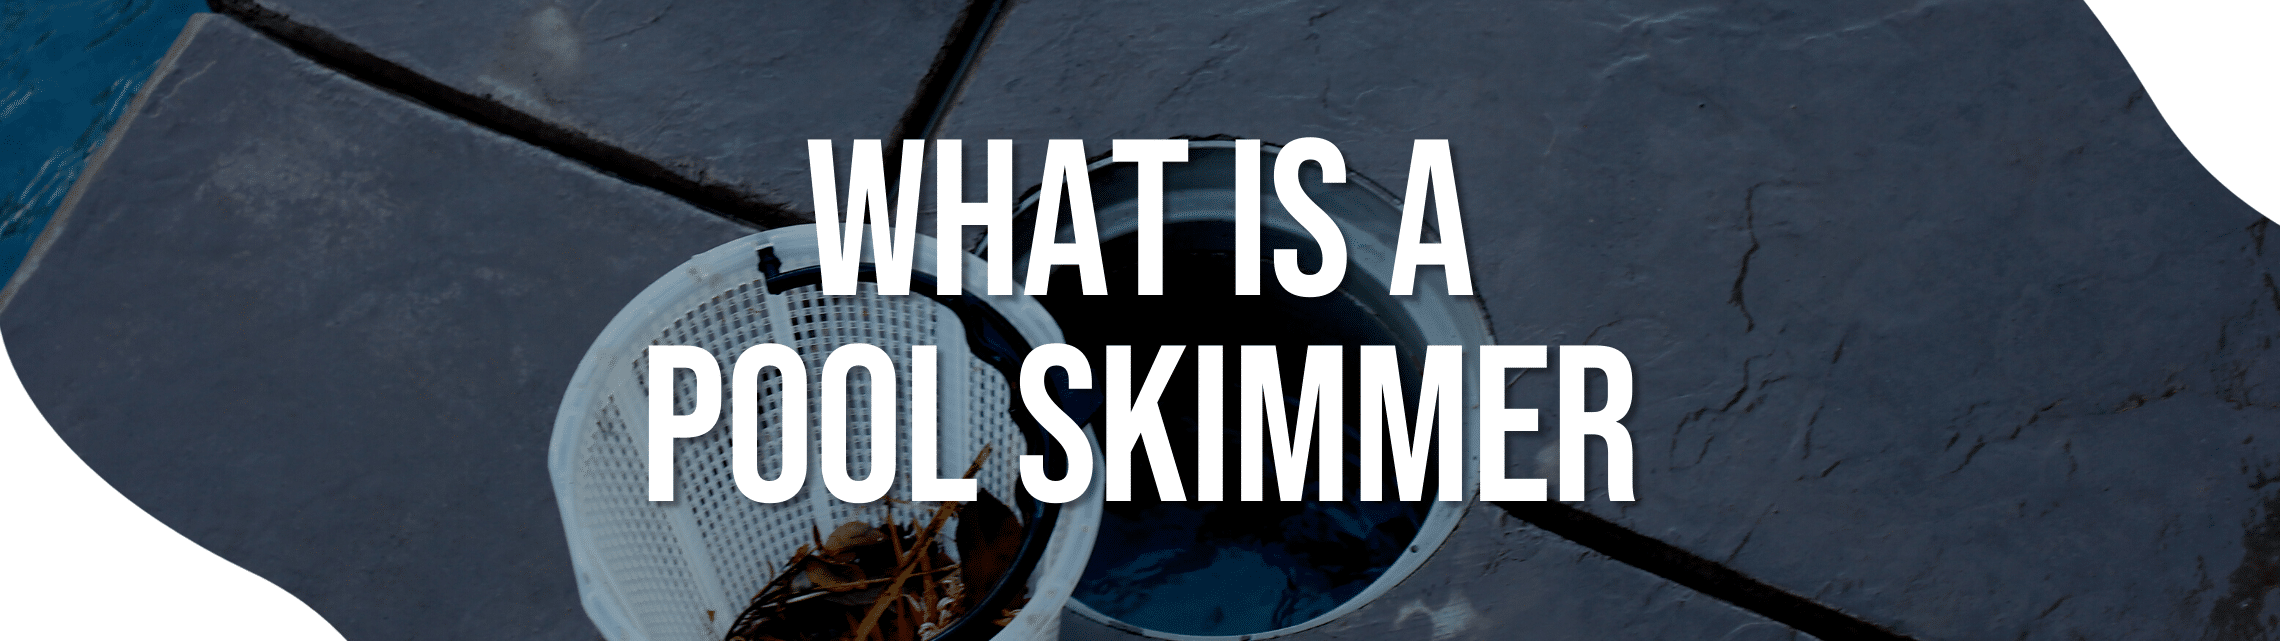 What is a pool skimmer